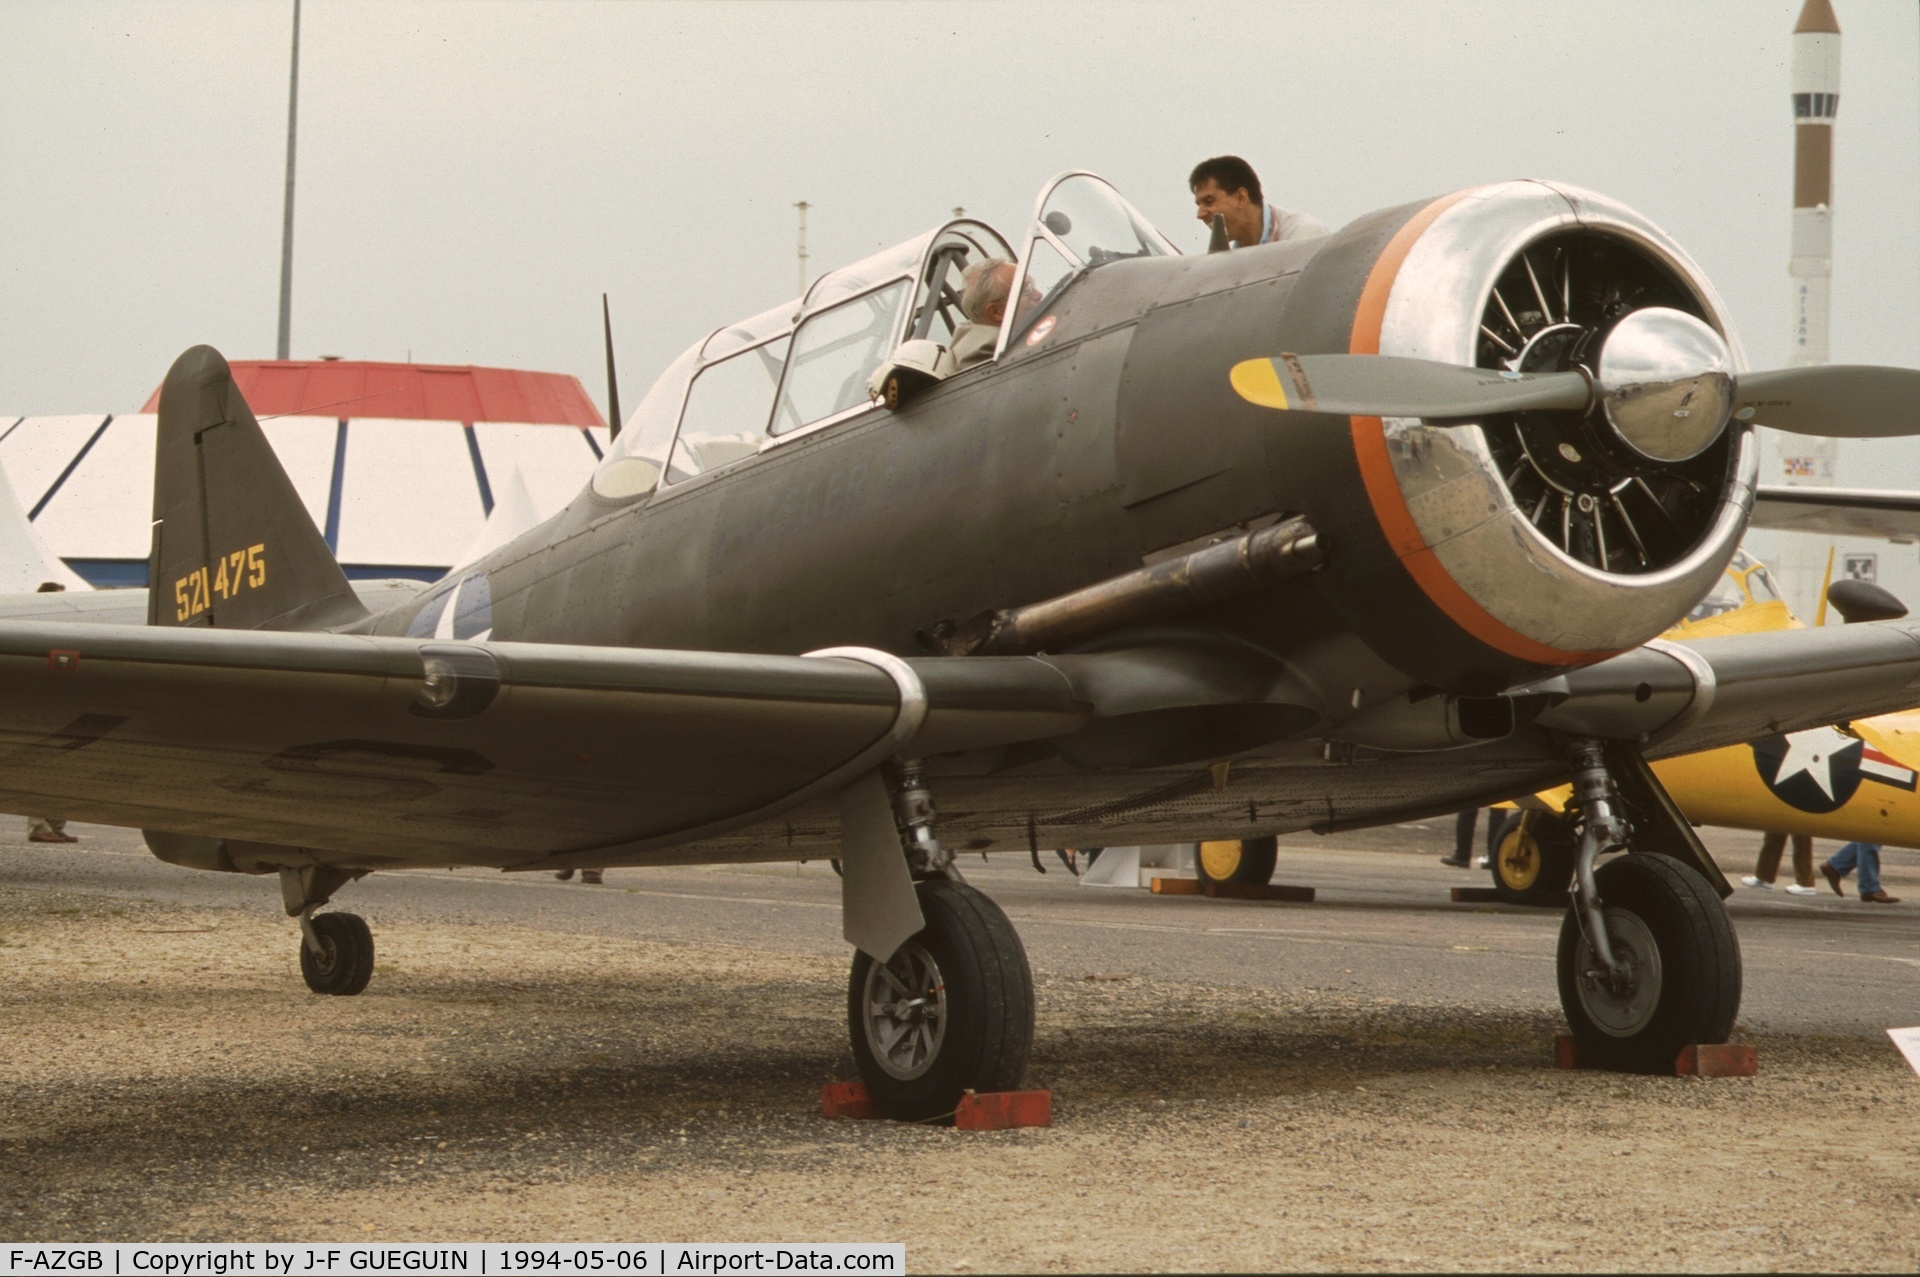 F-AZGB, Canadian Car & Foundry Harvard Mk.4 C/N CCF4-175, On display at Paris-Le Bourget Airport (1er Salon de l'Aviation Ancienne, 1994), ex-RCAF serial 20384 built in 1952, painted with false USAF serial 521475. (note: my next photo was placed here by mistake, it shows F-AZCM at La Ferté-Alais Airshow 2004)